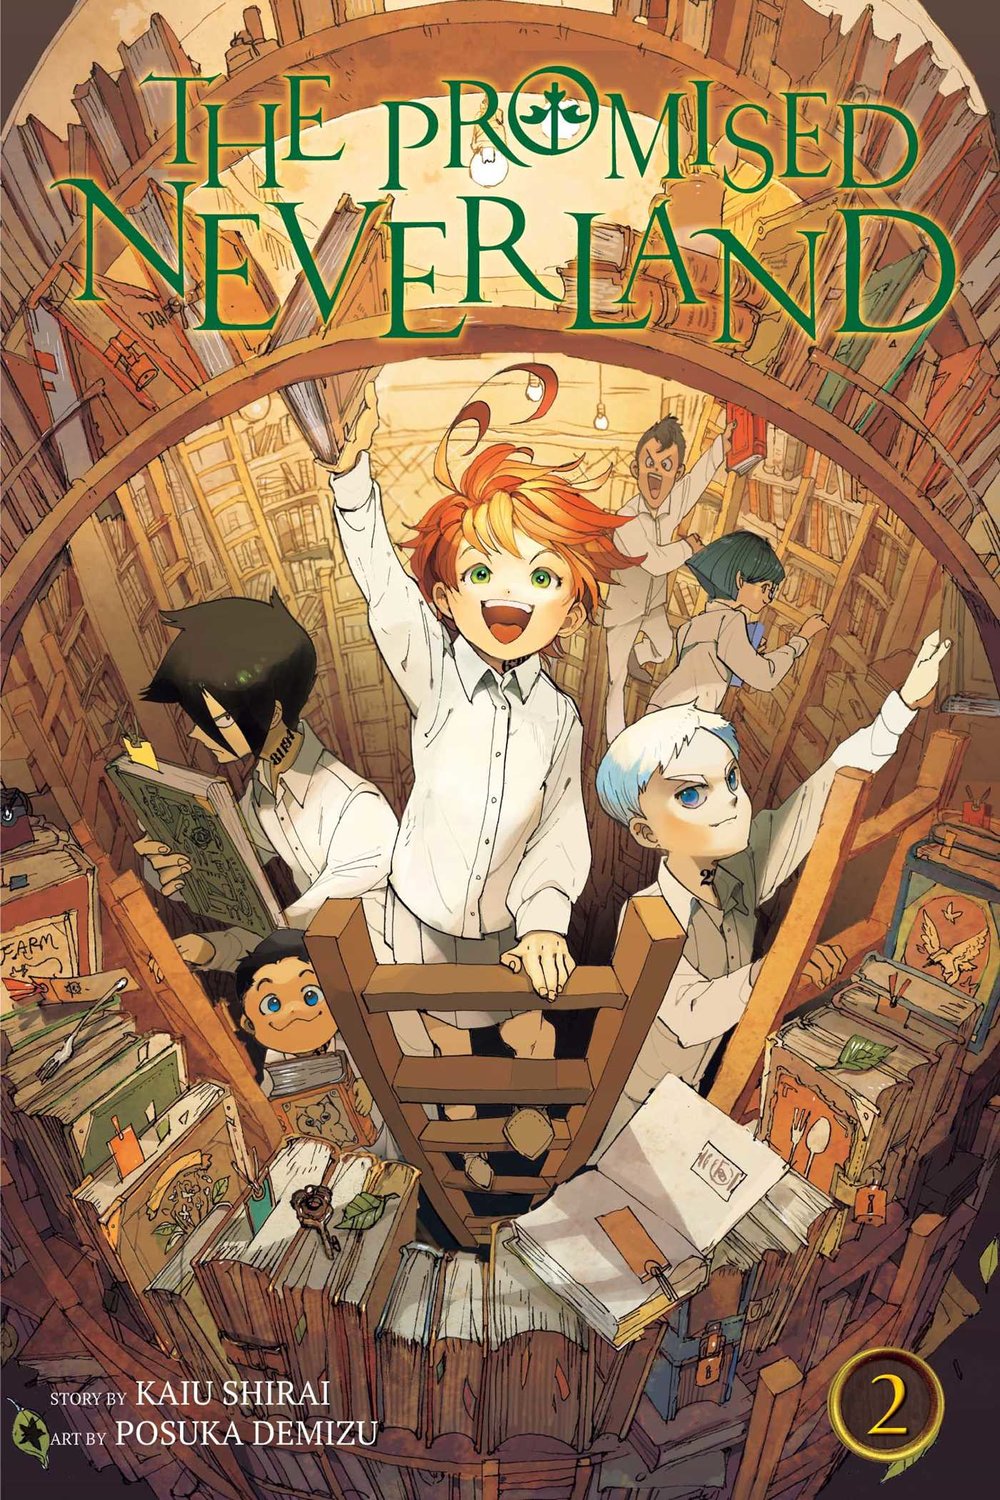 Review: 'The Promised Neverland' Season 1